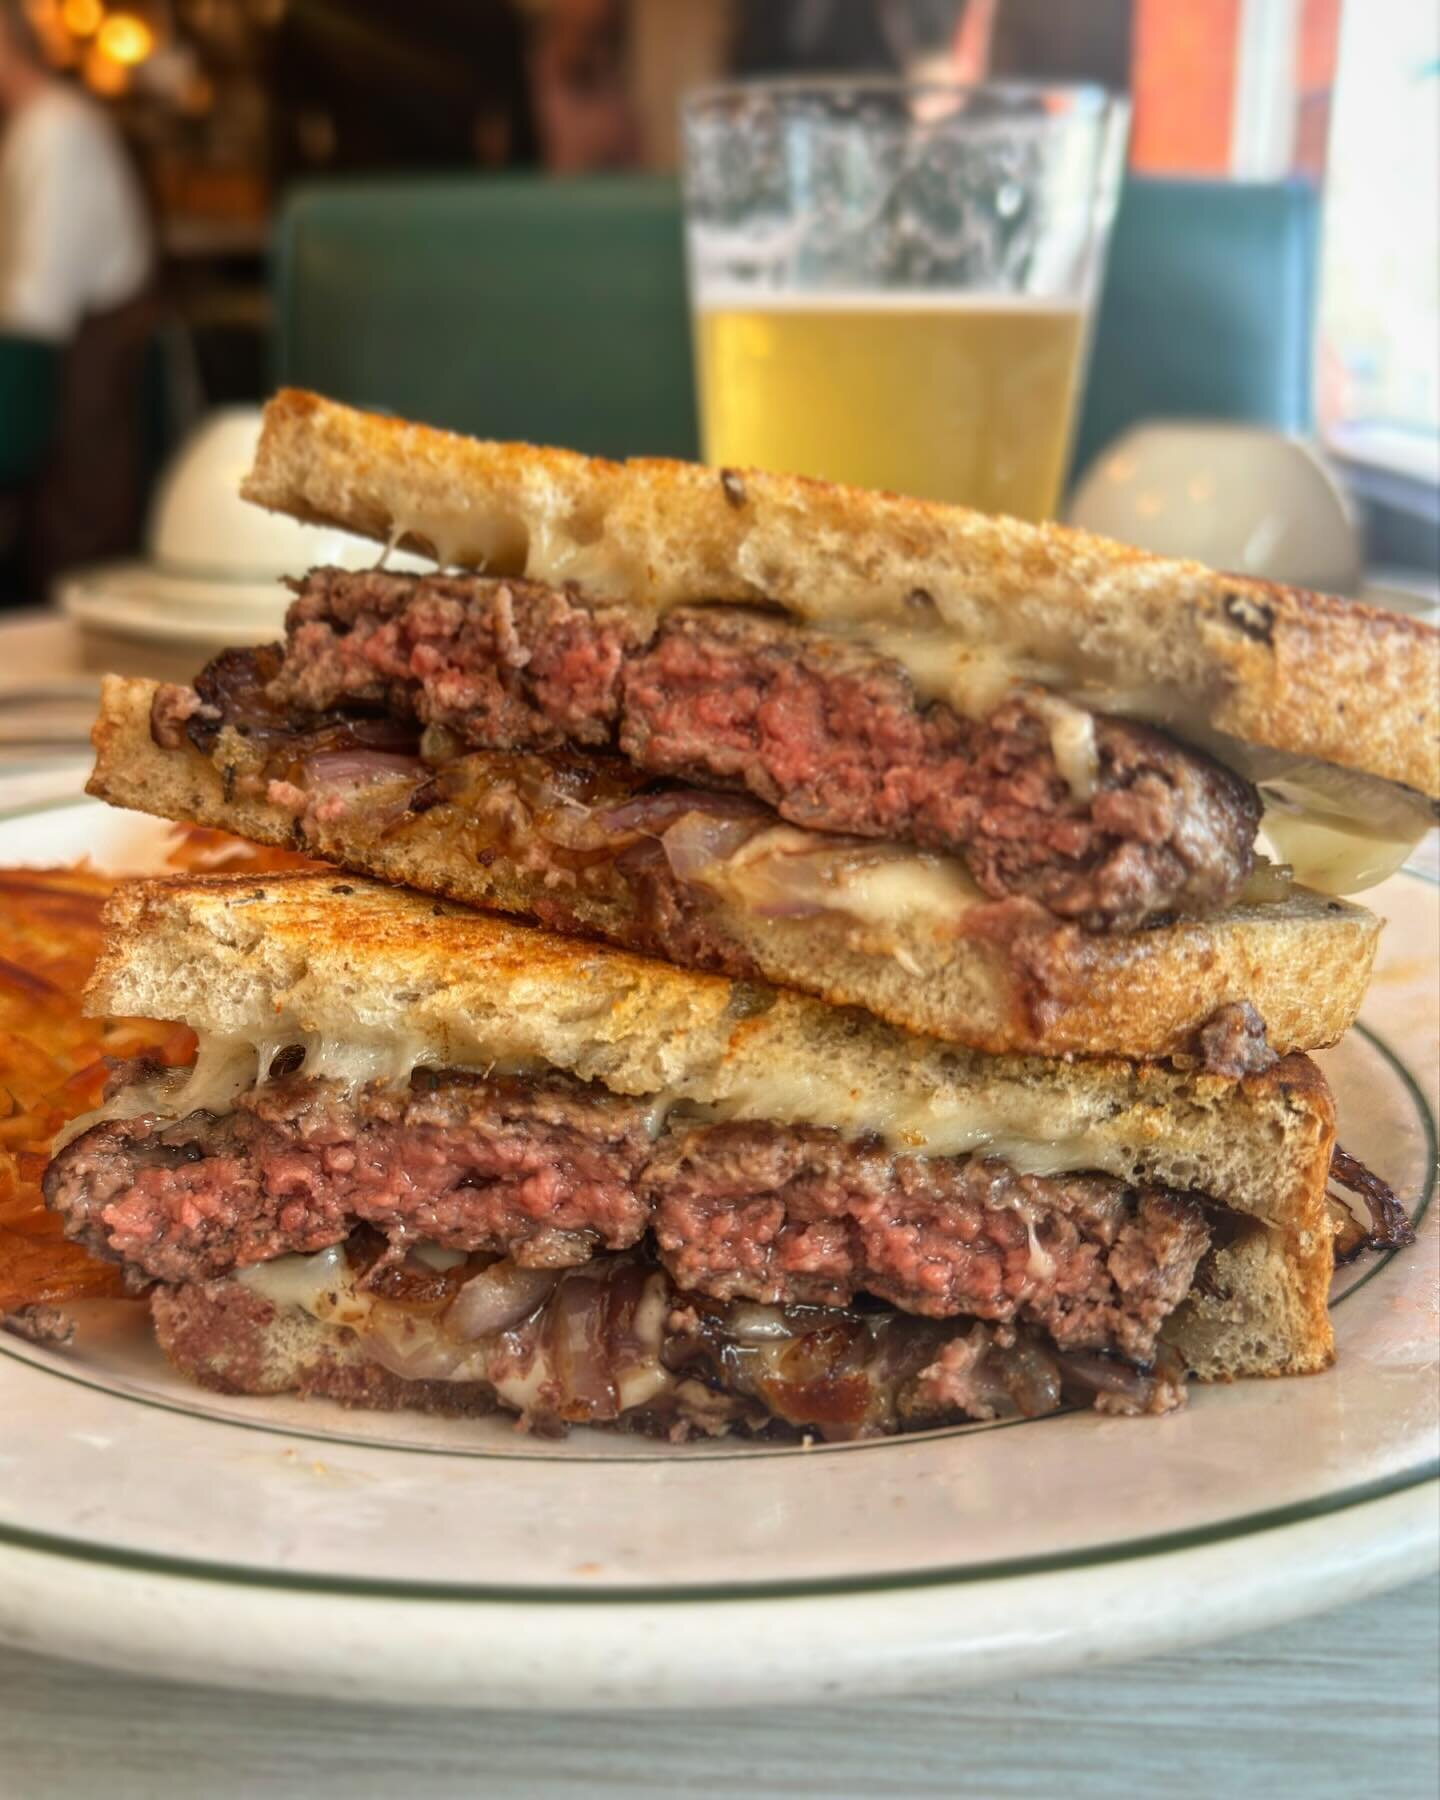 Here&rsquo;s the thing about patty melts: I fucking love them, but I&rsquo;ve always associated them with LA. If you&rsquo;ve been a long time follower, you might remember a couple pieces I penned about the patty melt proliferation back in 2018 for b